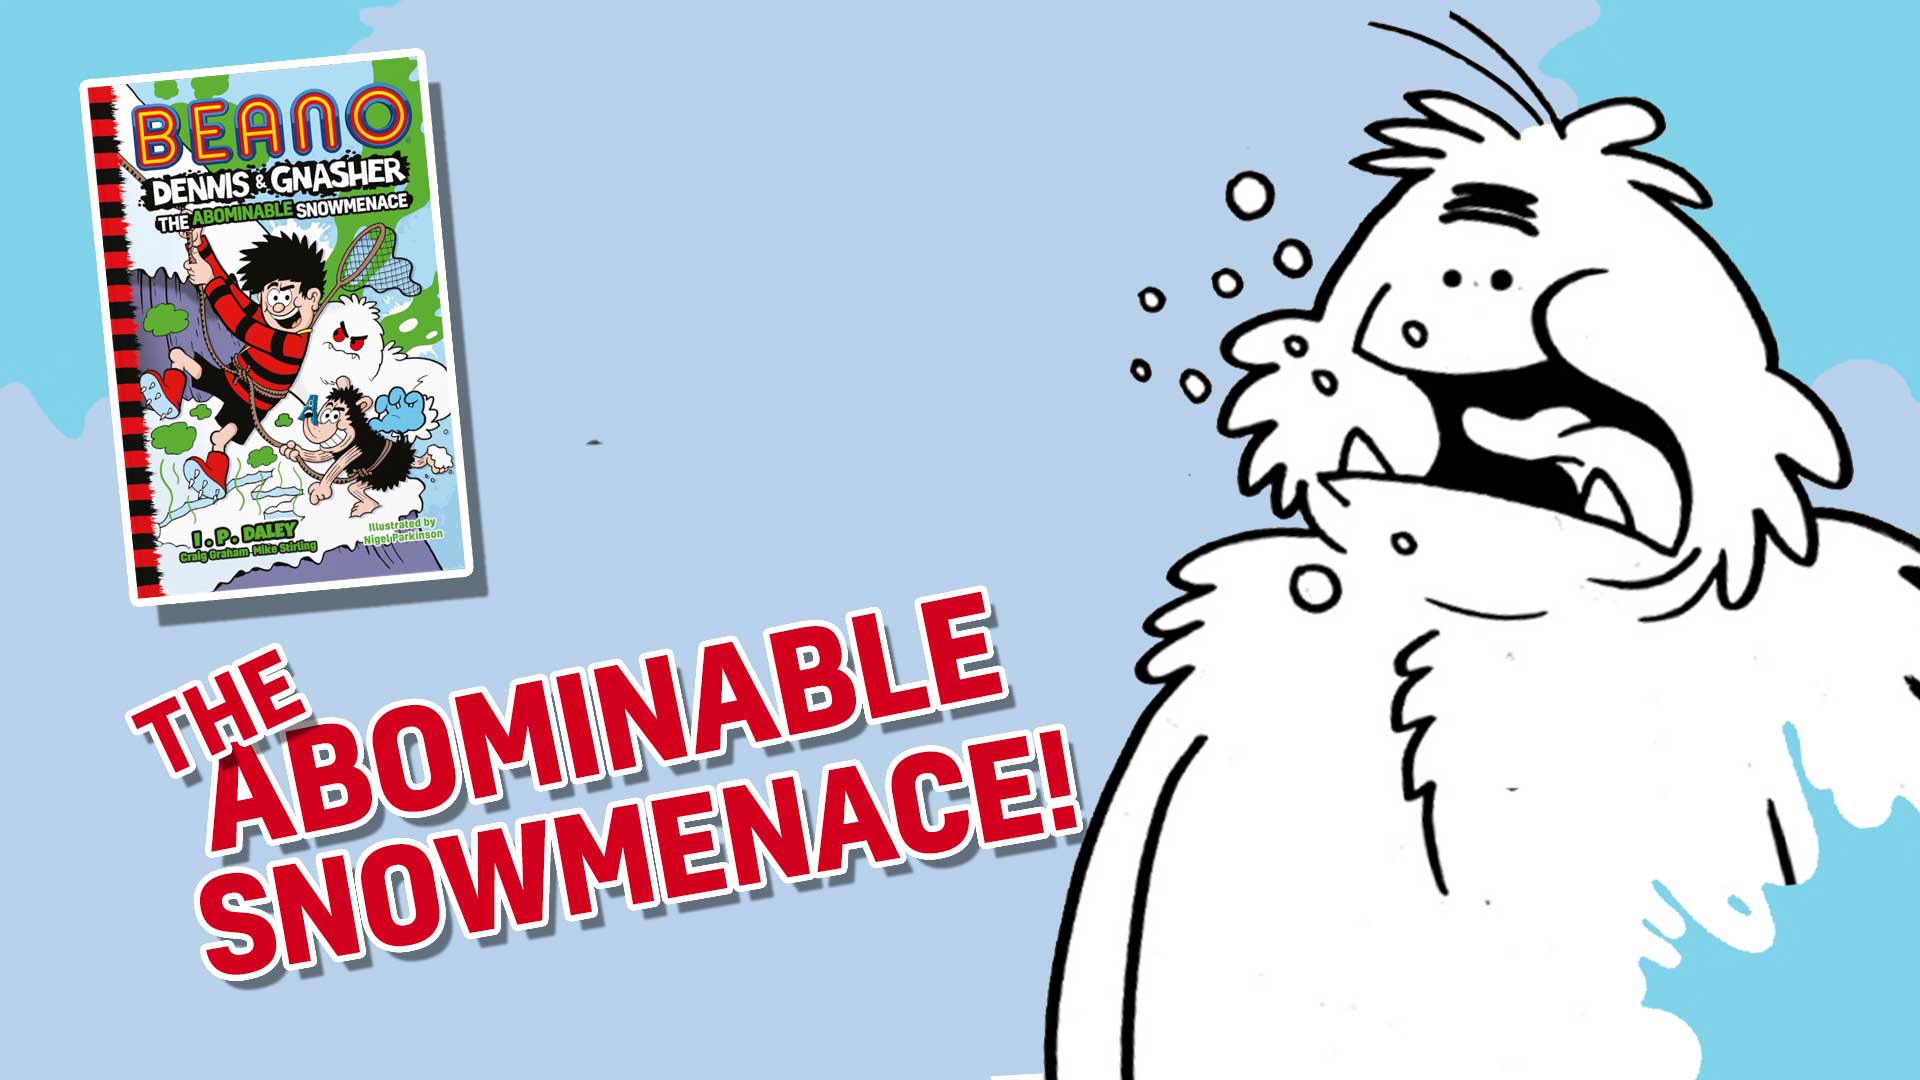 The Abominable Snowmenace